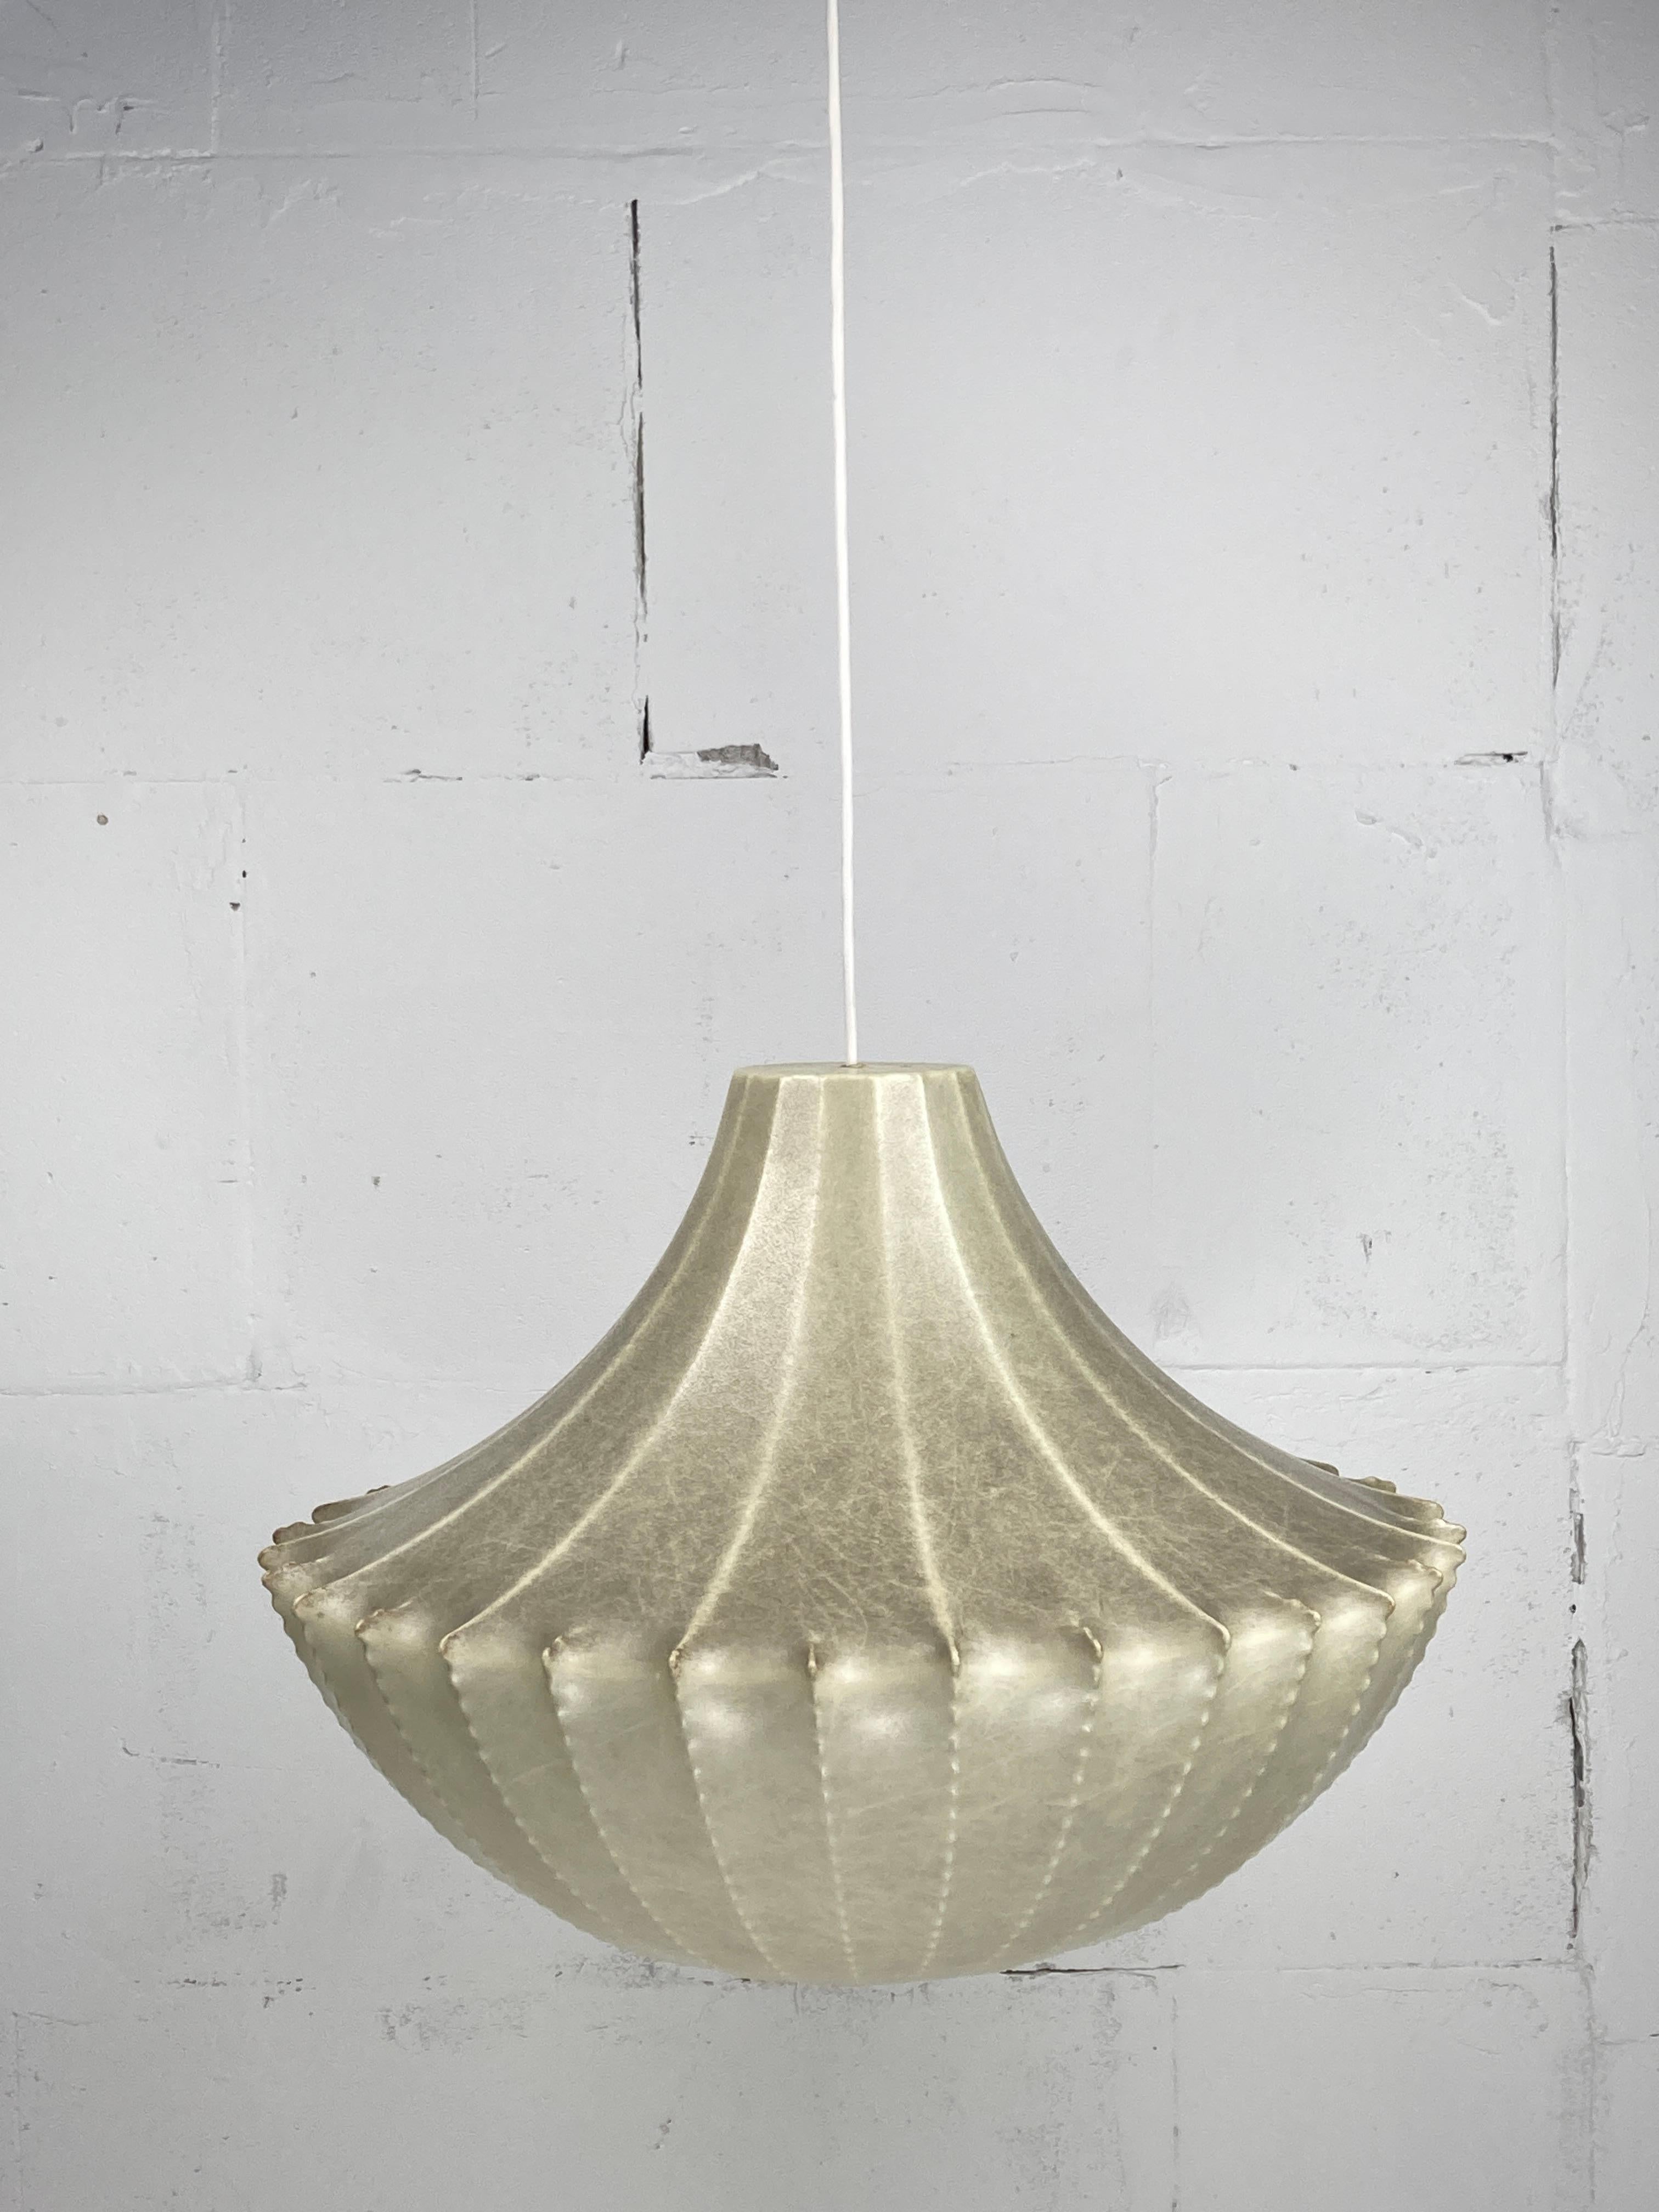 A large ( height 60 cm diameter 45 cm ) cocoon pendant from Germany 1960s. Generally these are attributed to Goldkant and often referred to as in the style of the cocoon pendants by Friedel Wauer and Achille Castiglioni for Flos. The stretched resin